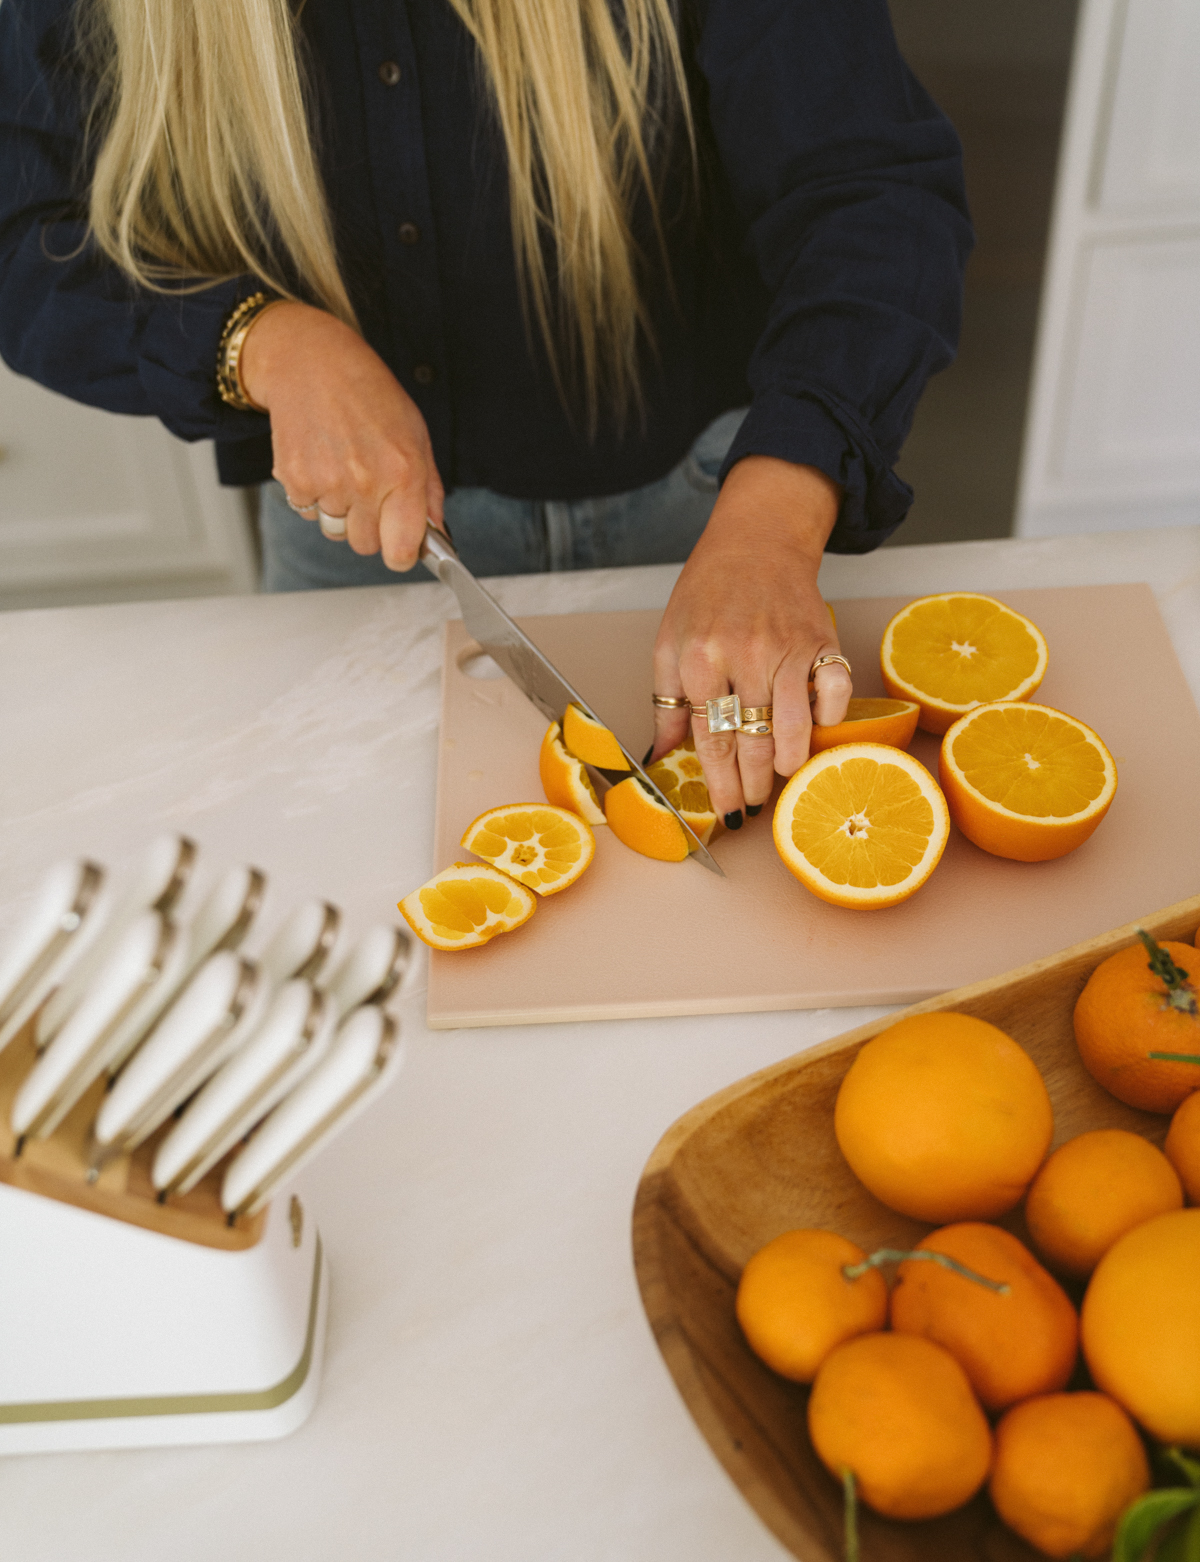 top view of woman slicing oranges